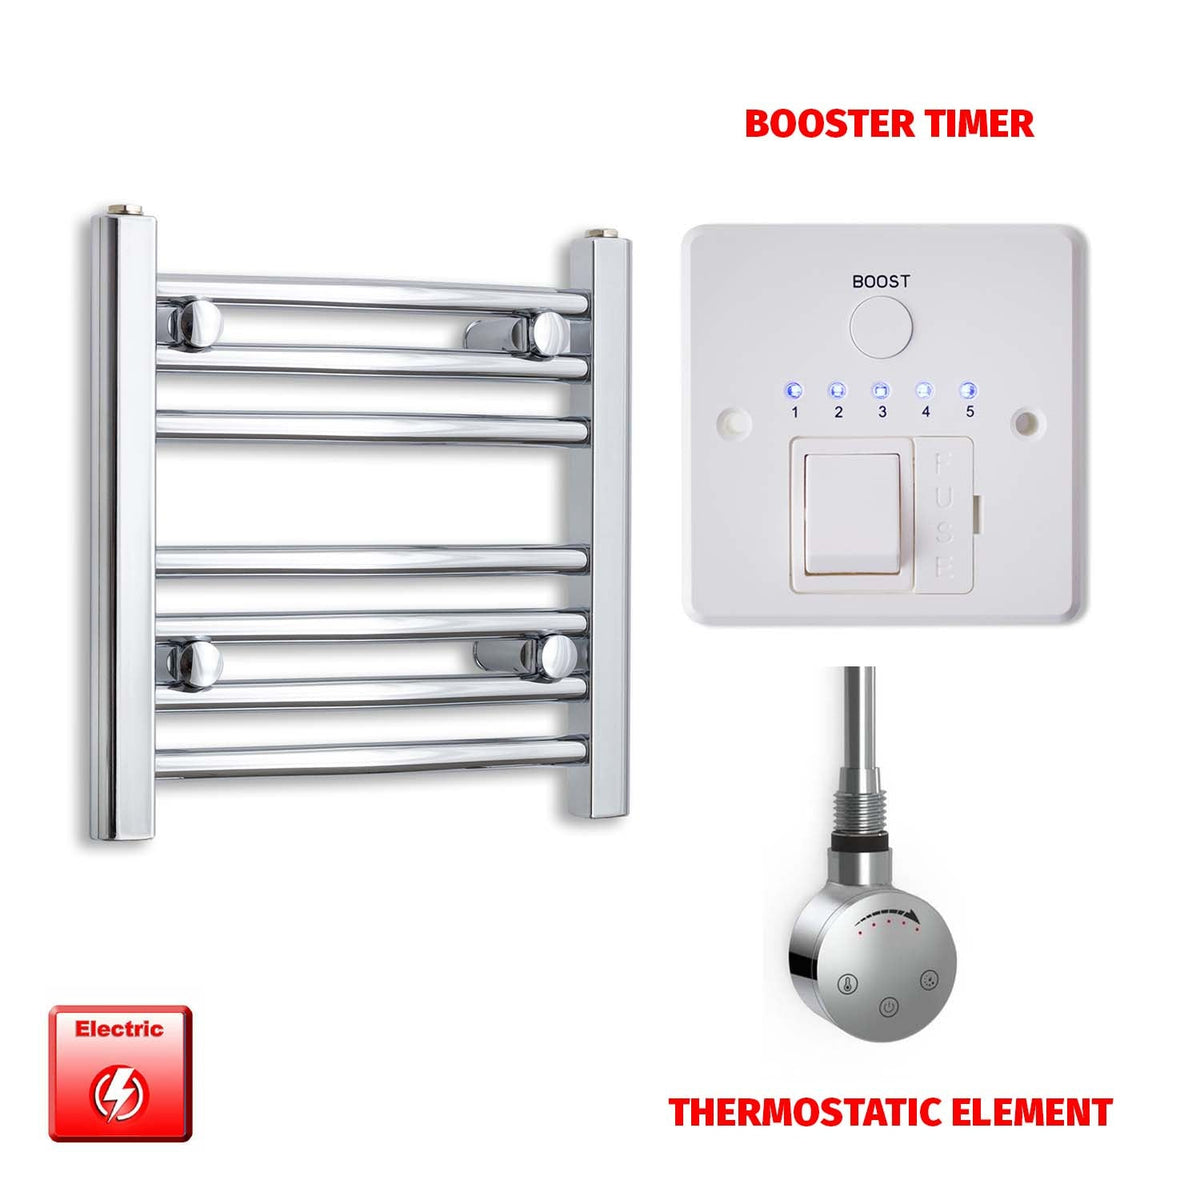 400mm High 400mm Wide Pre-Filled Electric Heated Towel Radiator Straight Chrome SMR Thermostatic element Booster timer